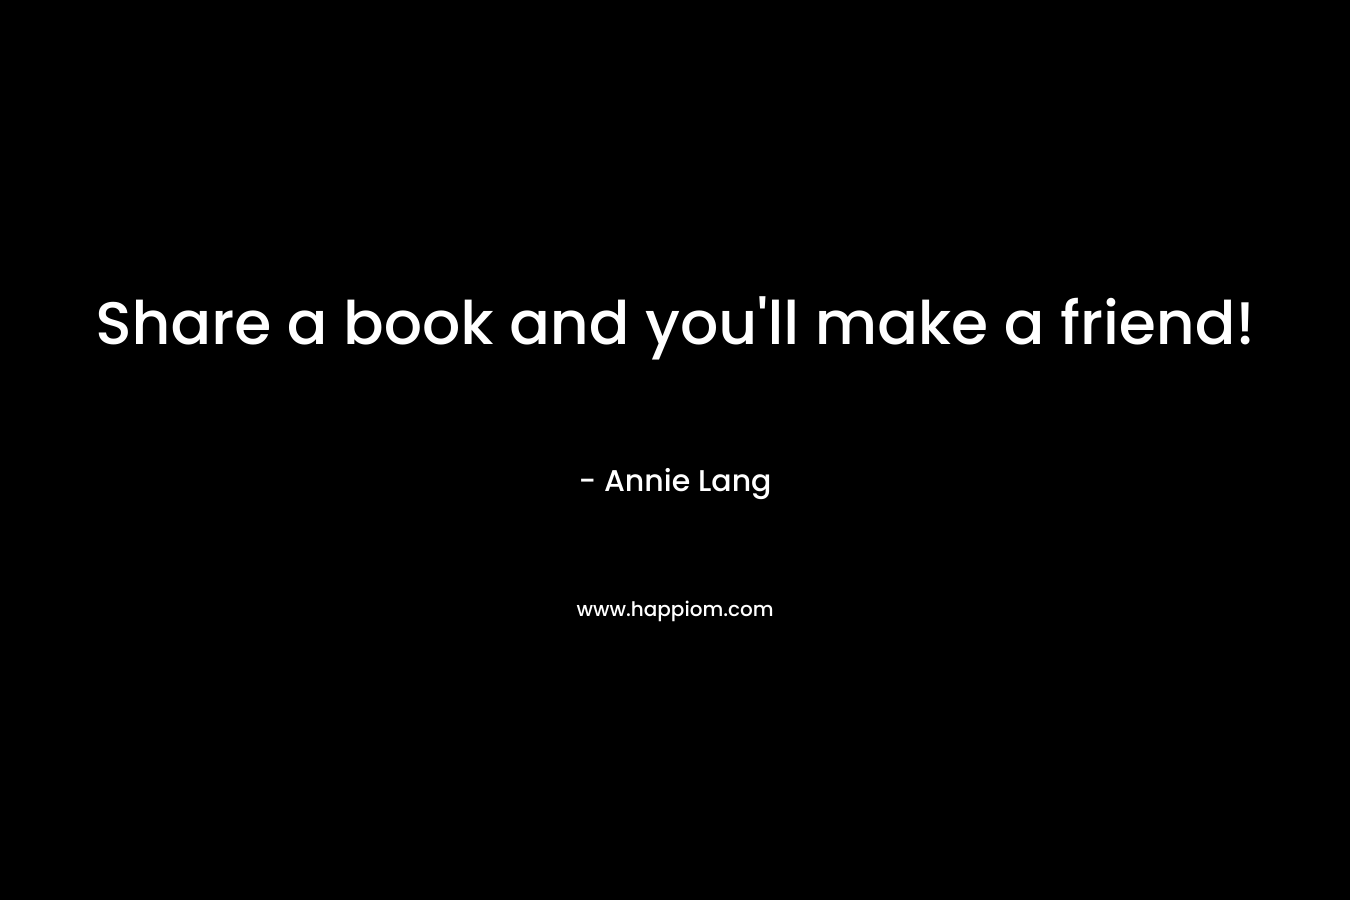 Share a book and you'll make a friend!